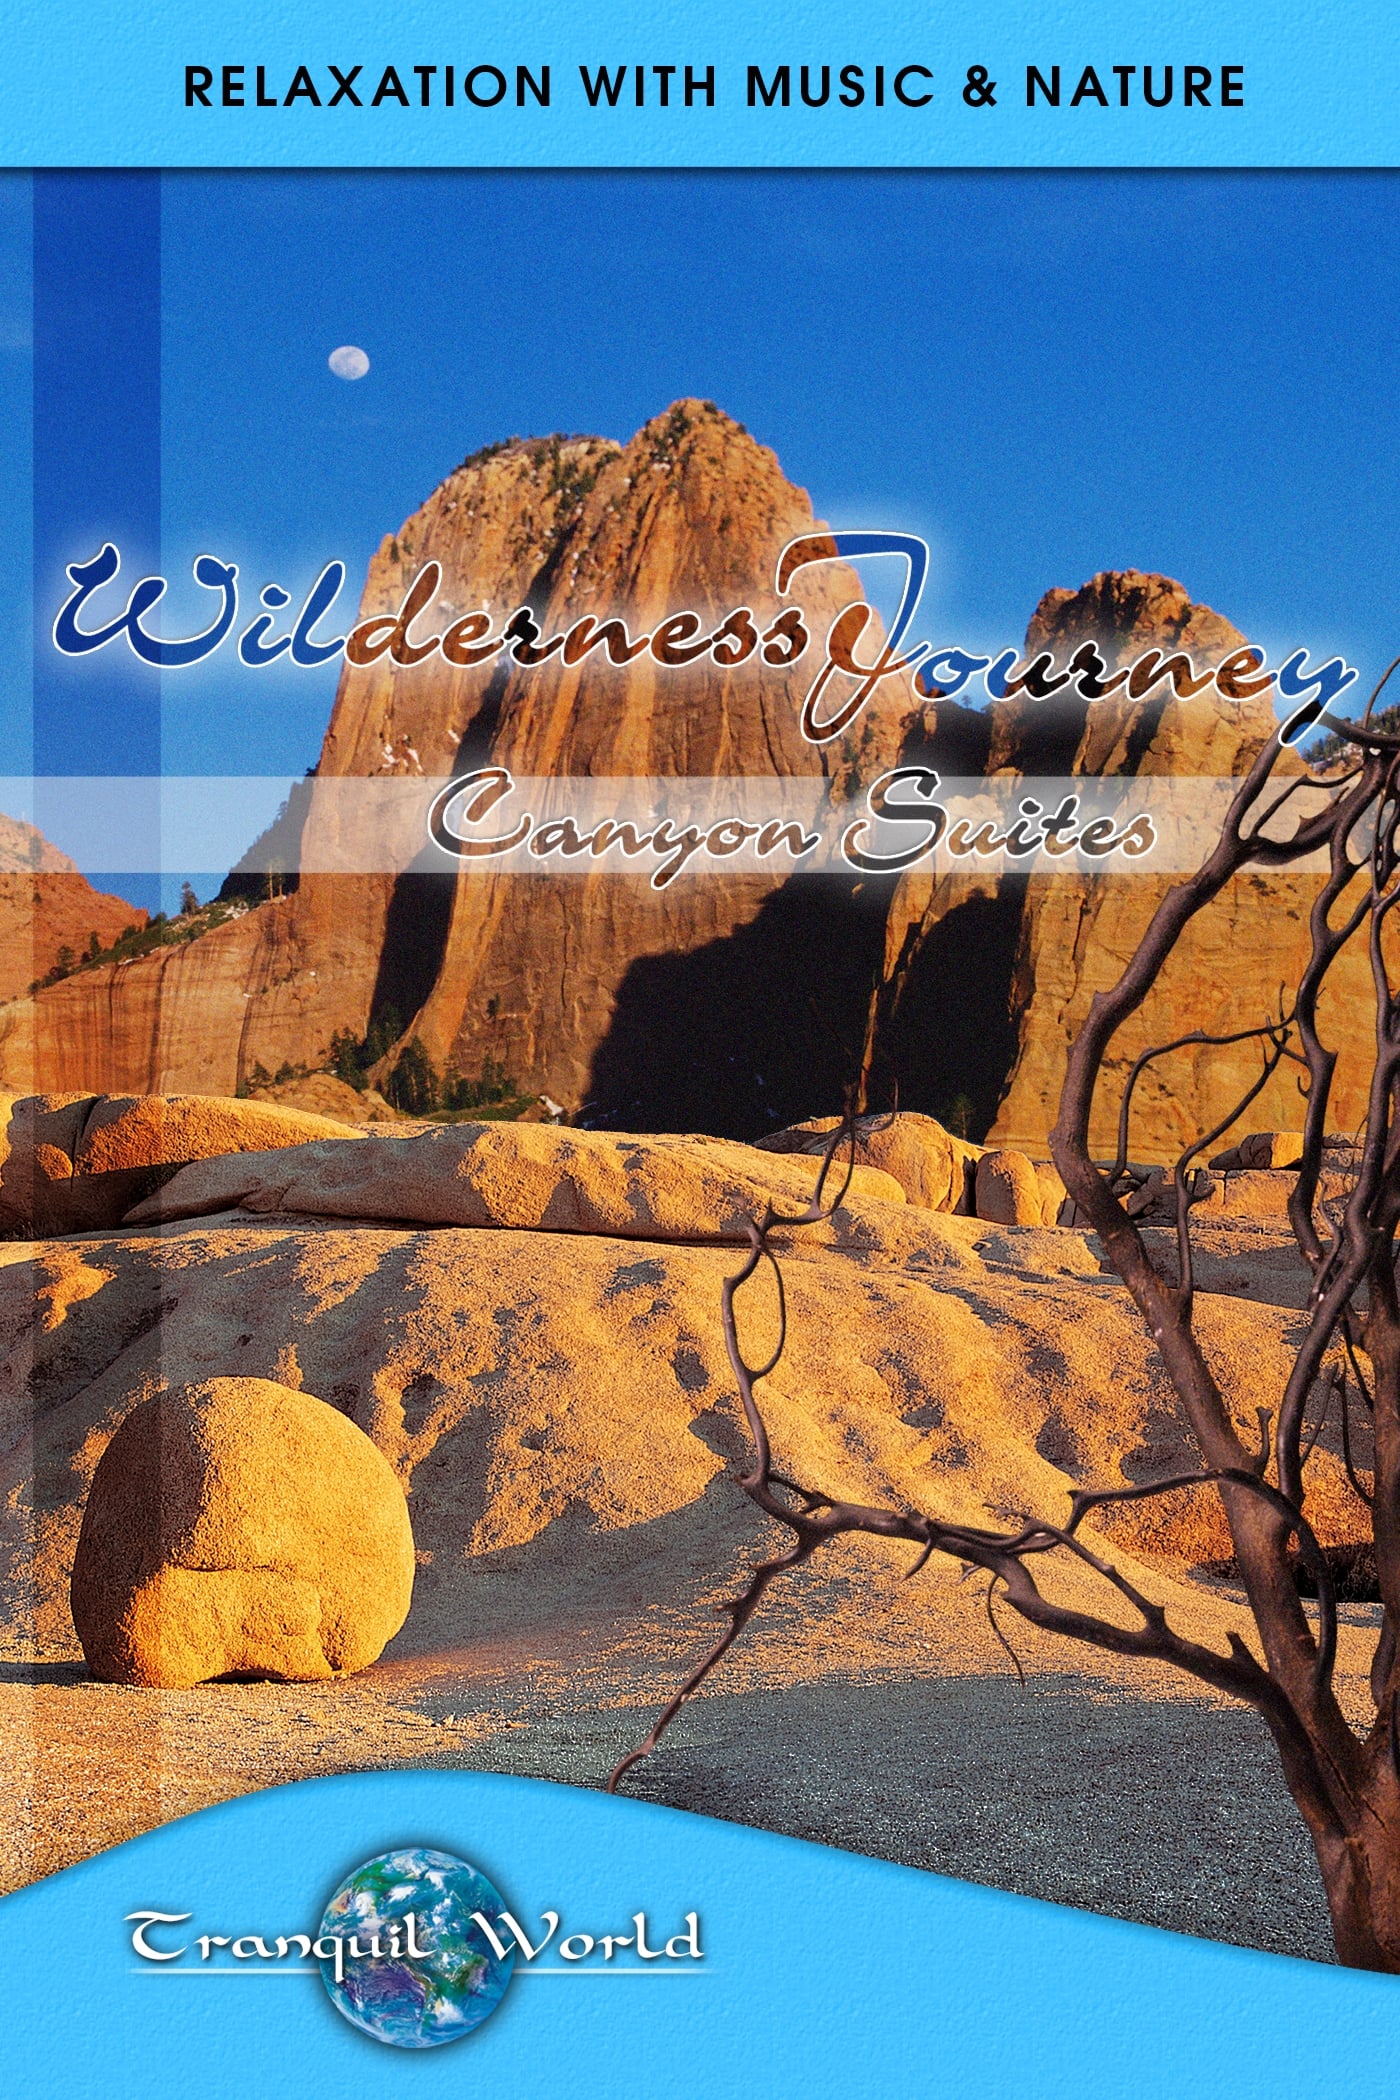 Wilderness Journey - Canyon Suites: Tranquil World - Relaxation with Music & Nature on FREECABLE TV